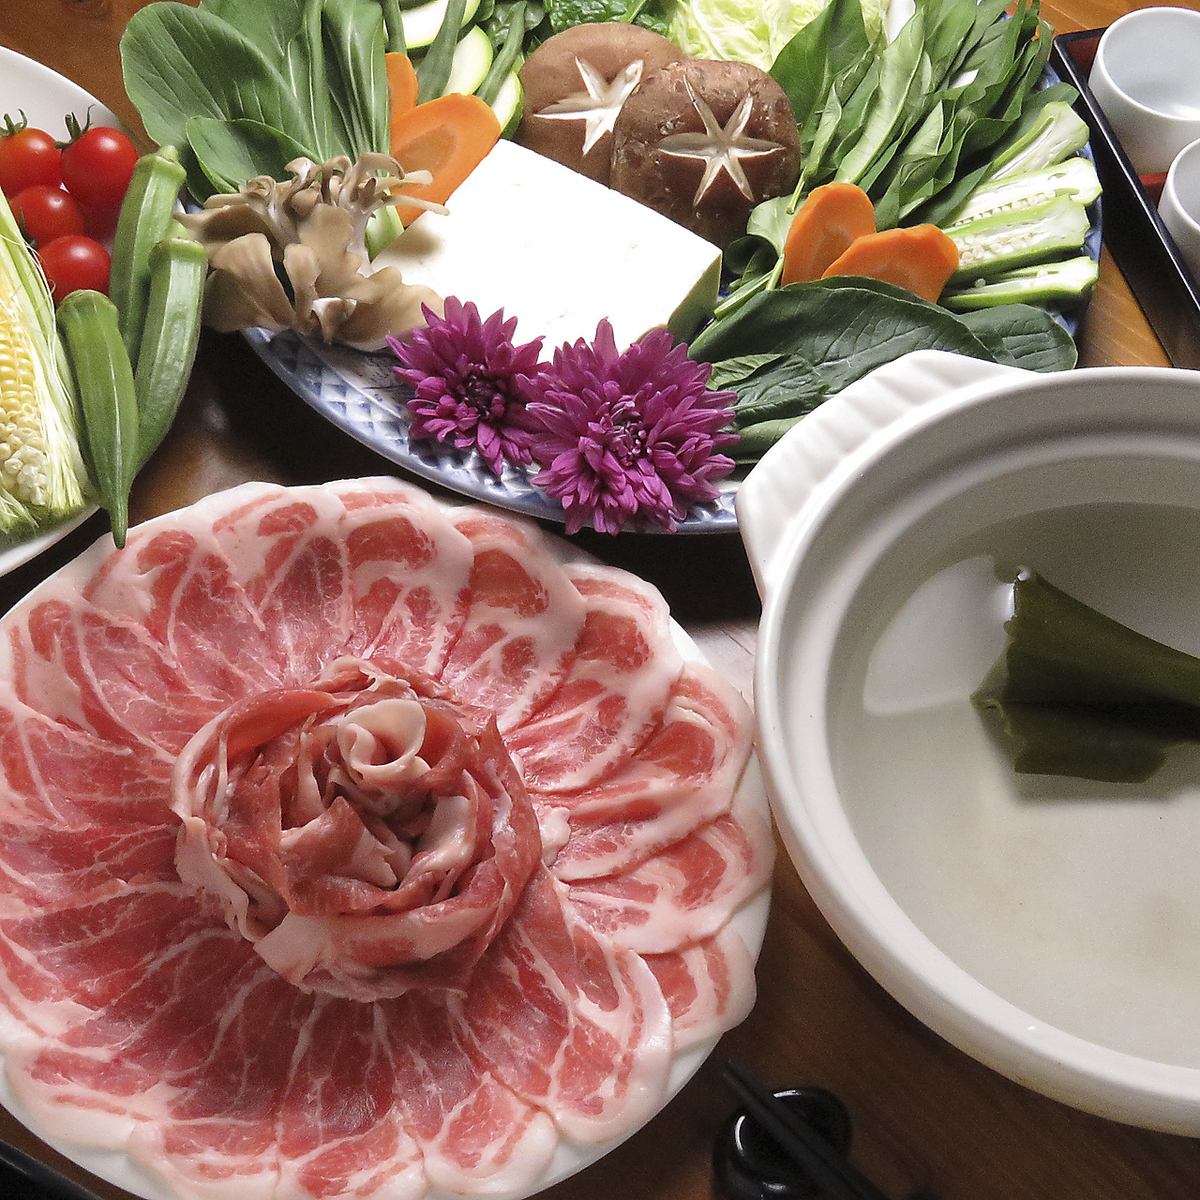 A must-see for Japanese sake lovers★ Enjoy seasonal specialties made with Yamagata ingredients in your favorite cup